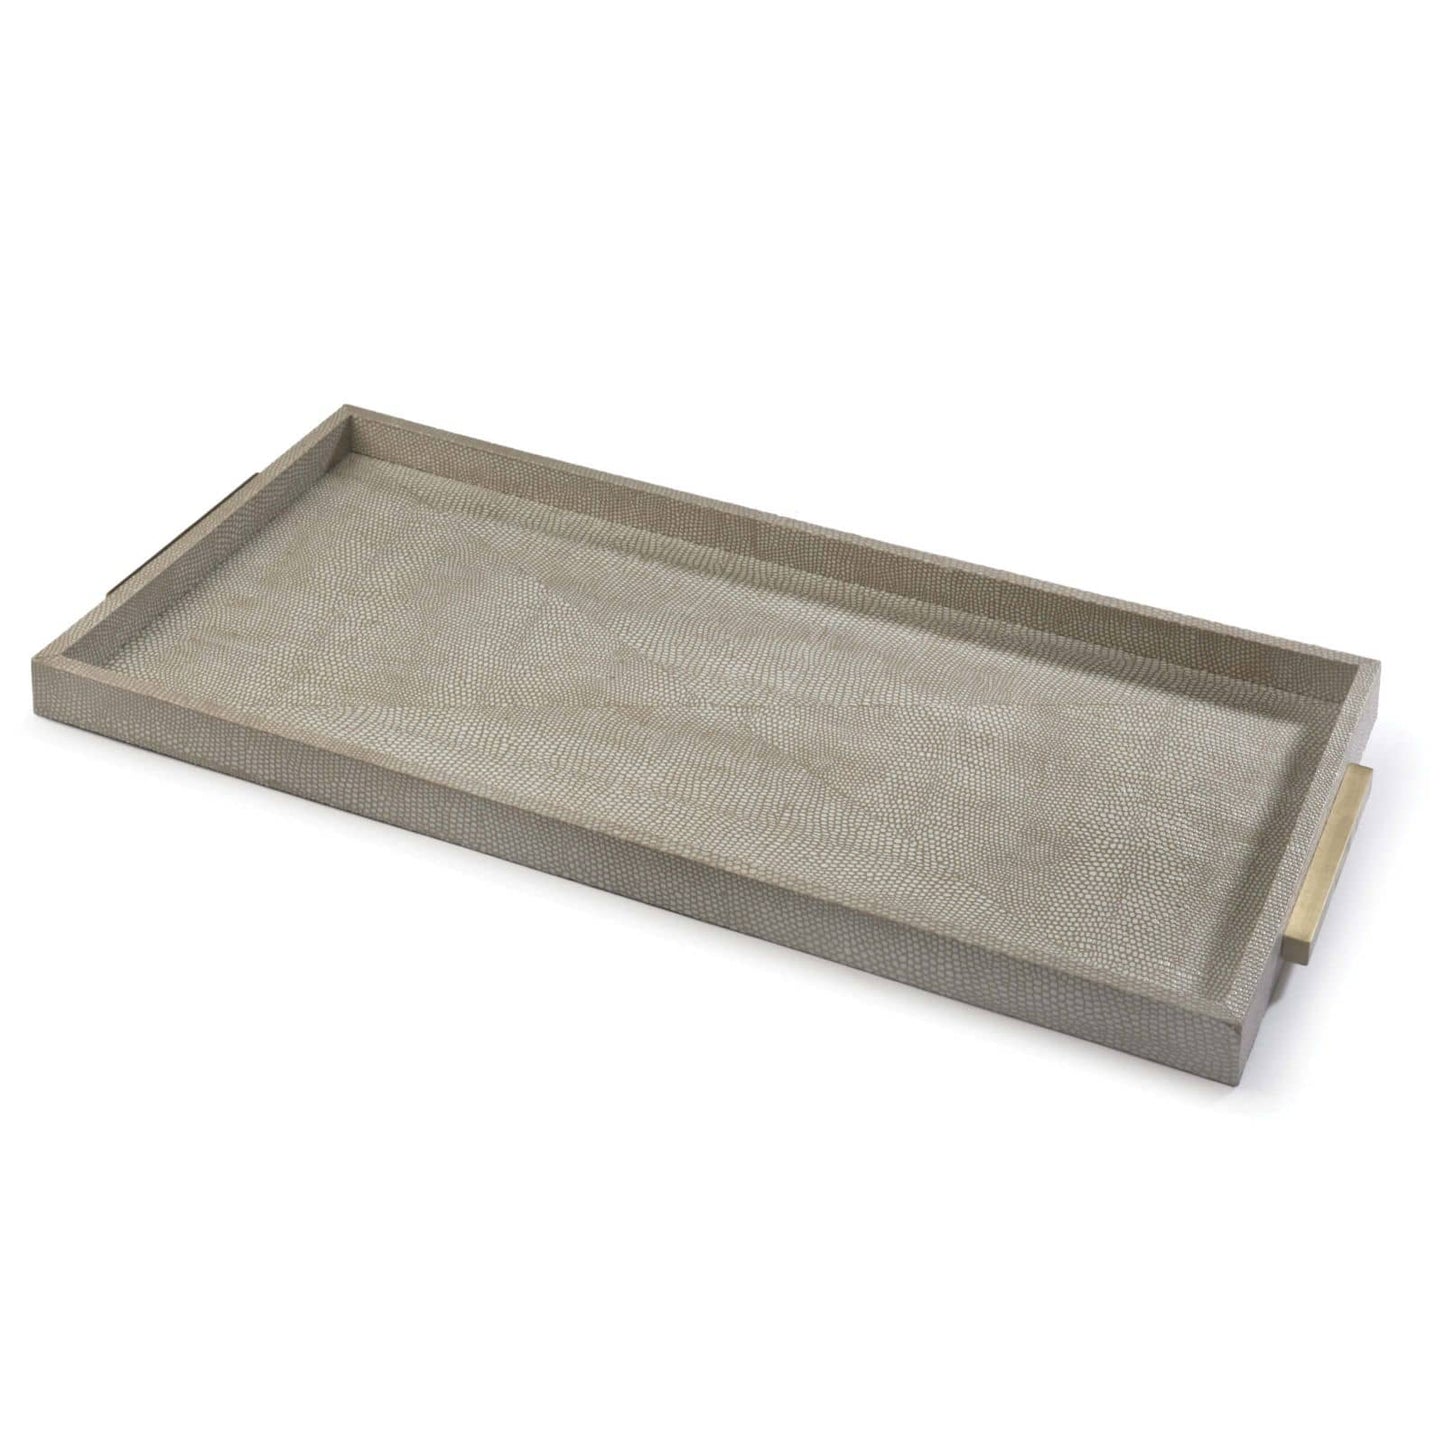 Rectangle Shagreen Boutique Tray in Ivory Grey Python by Regina Andrew